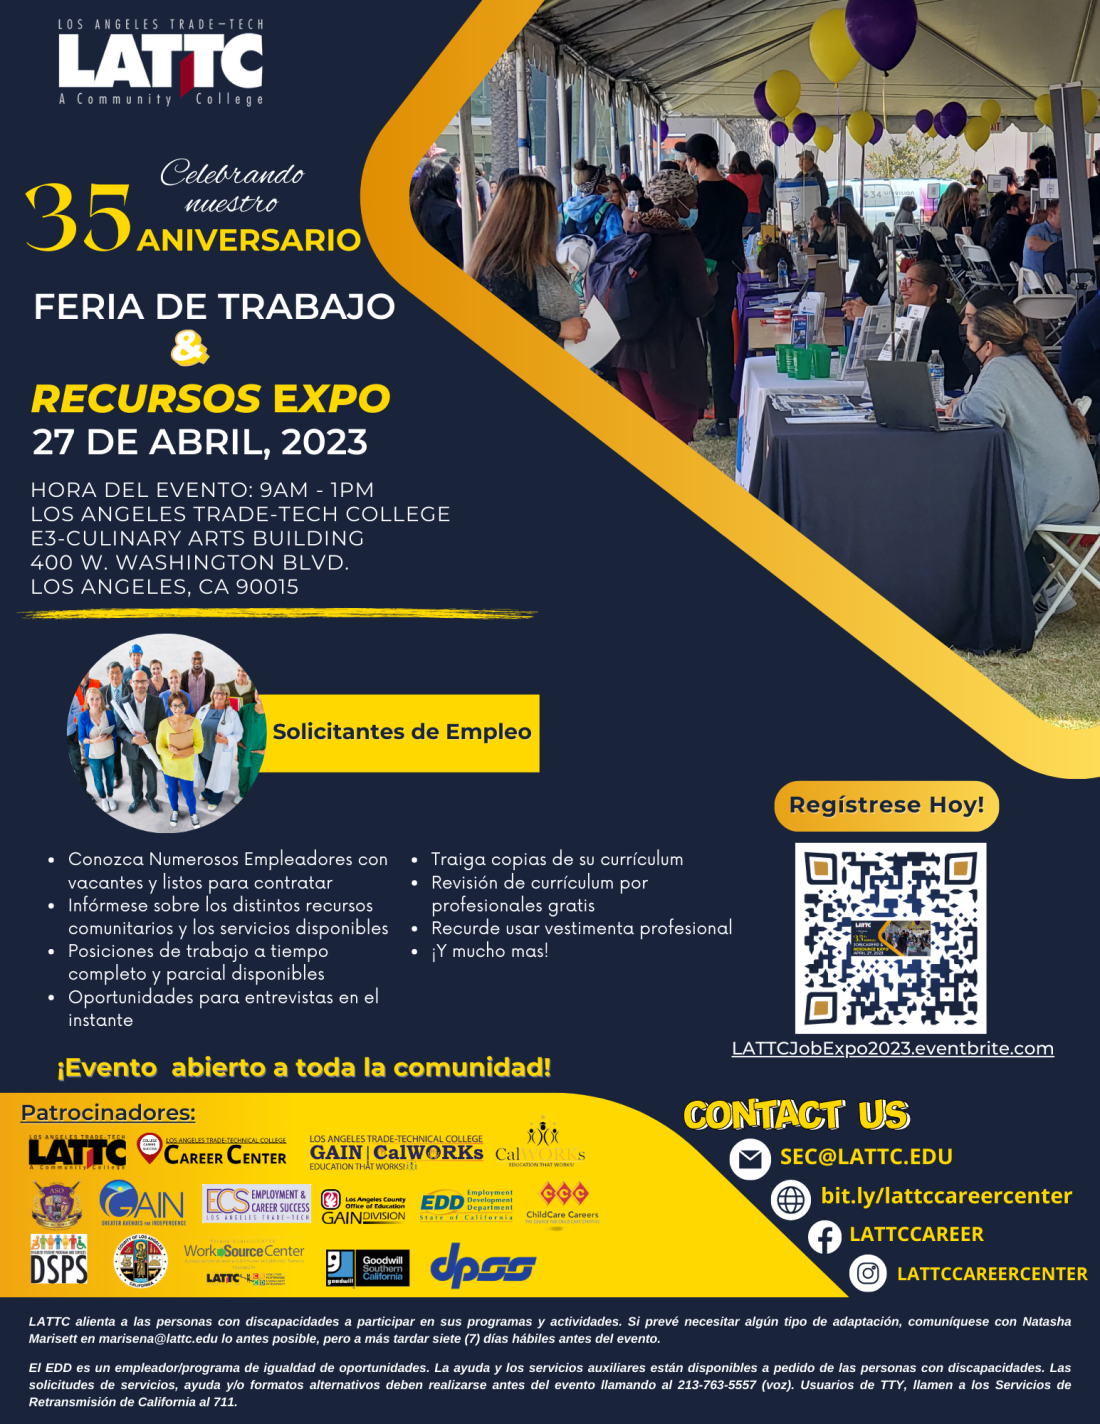 Job-Career and Resource Expo Flyer in Spanish